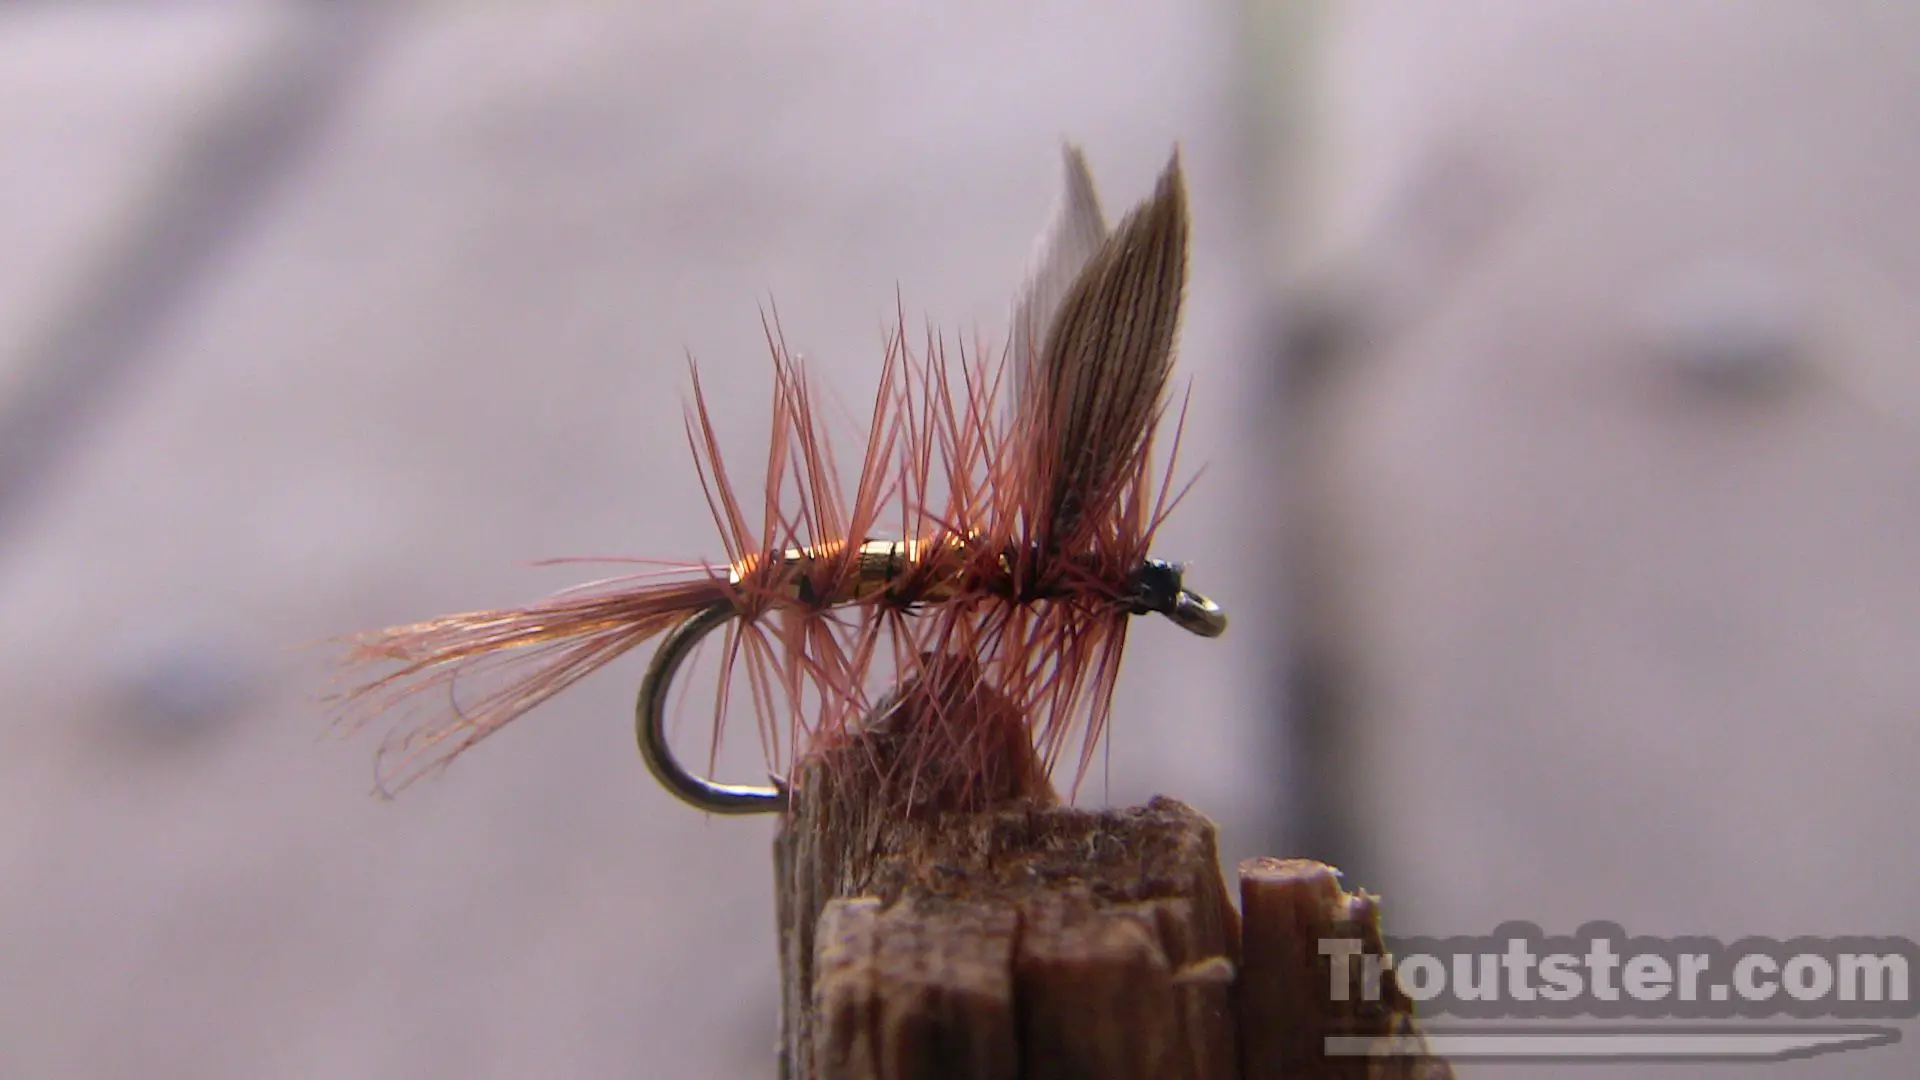 Wickhams fancy fly. Tied using brown hackle, gold ribbing and duck wing feathers.